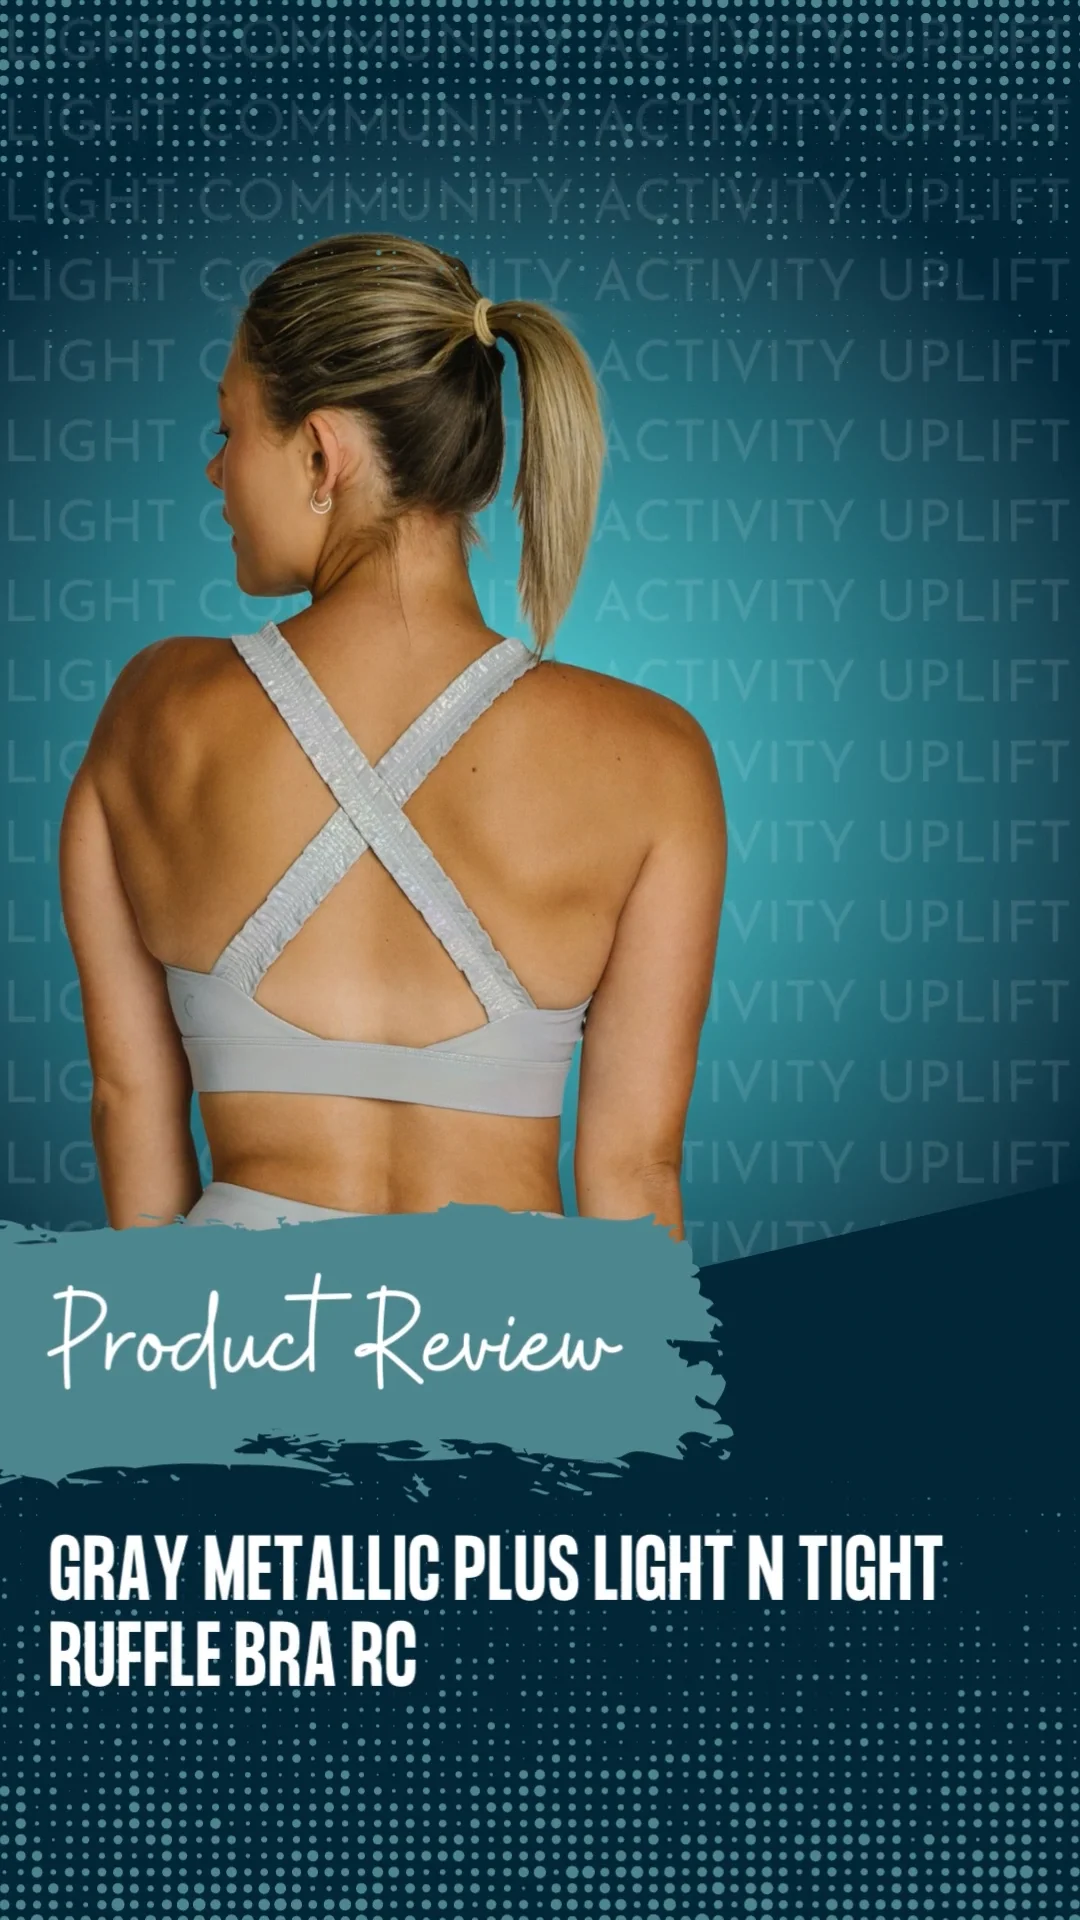 Zyia Active Pewter All Star Bra RC #808 on Vimeo